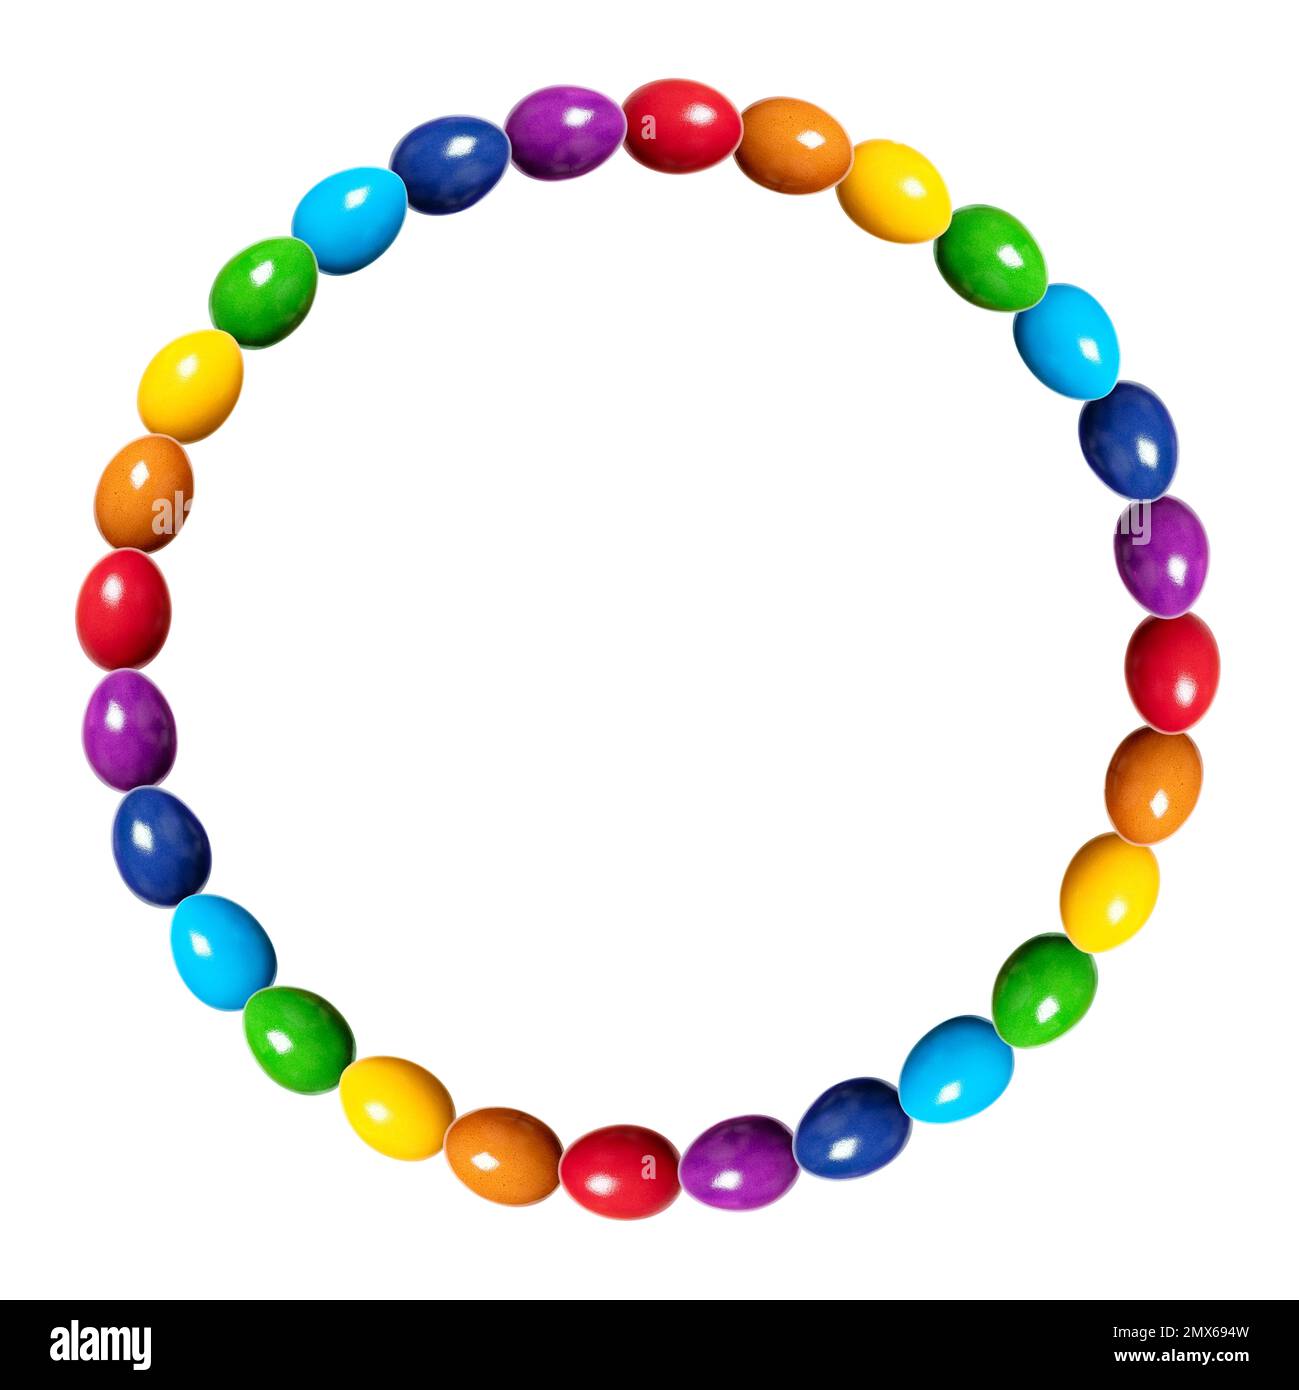 Circle border made of rainbow colored eggs. Circular frame, made of multi colored, dyed chicken eggs. Traditionally used during Easter time as a gift. Stock Photo